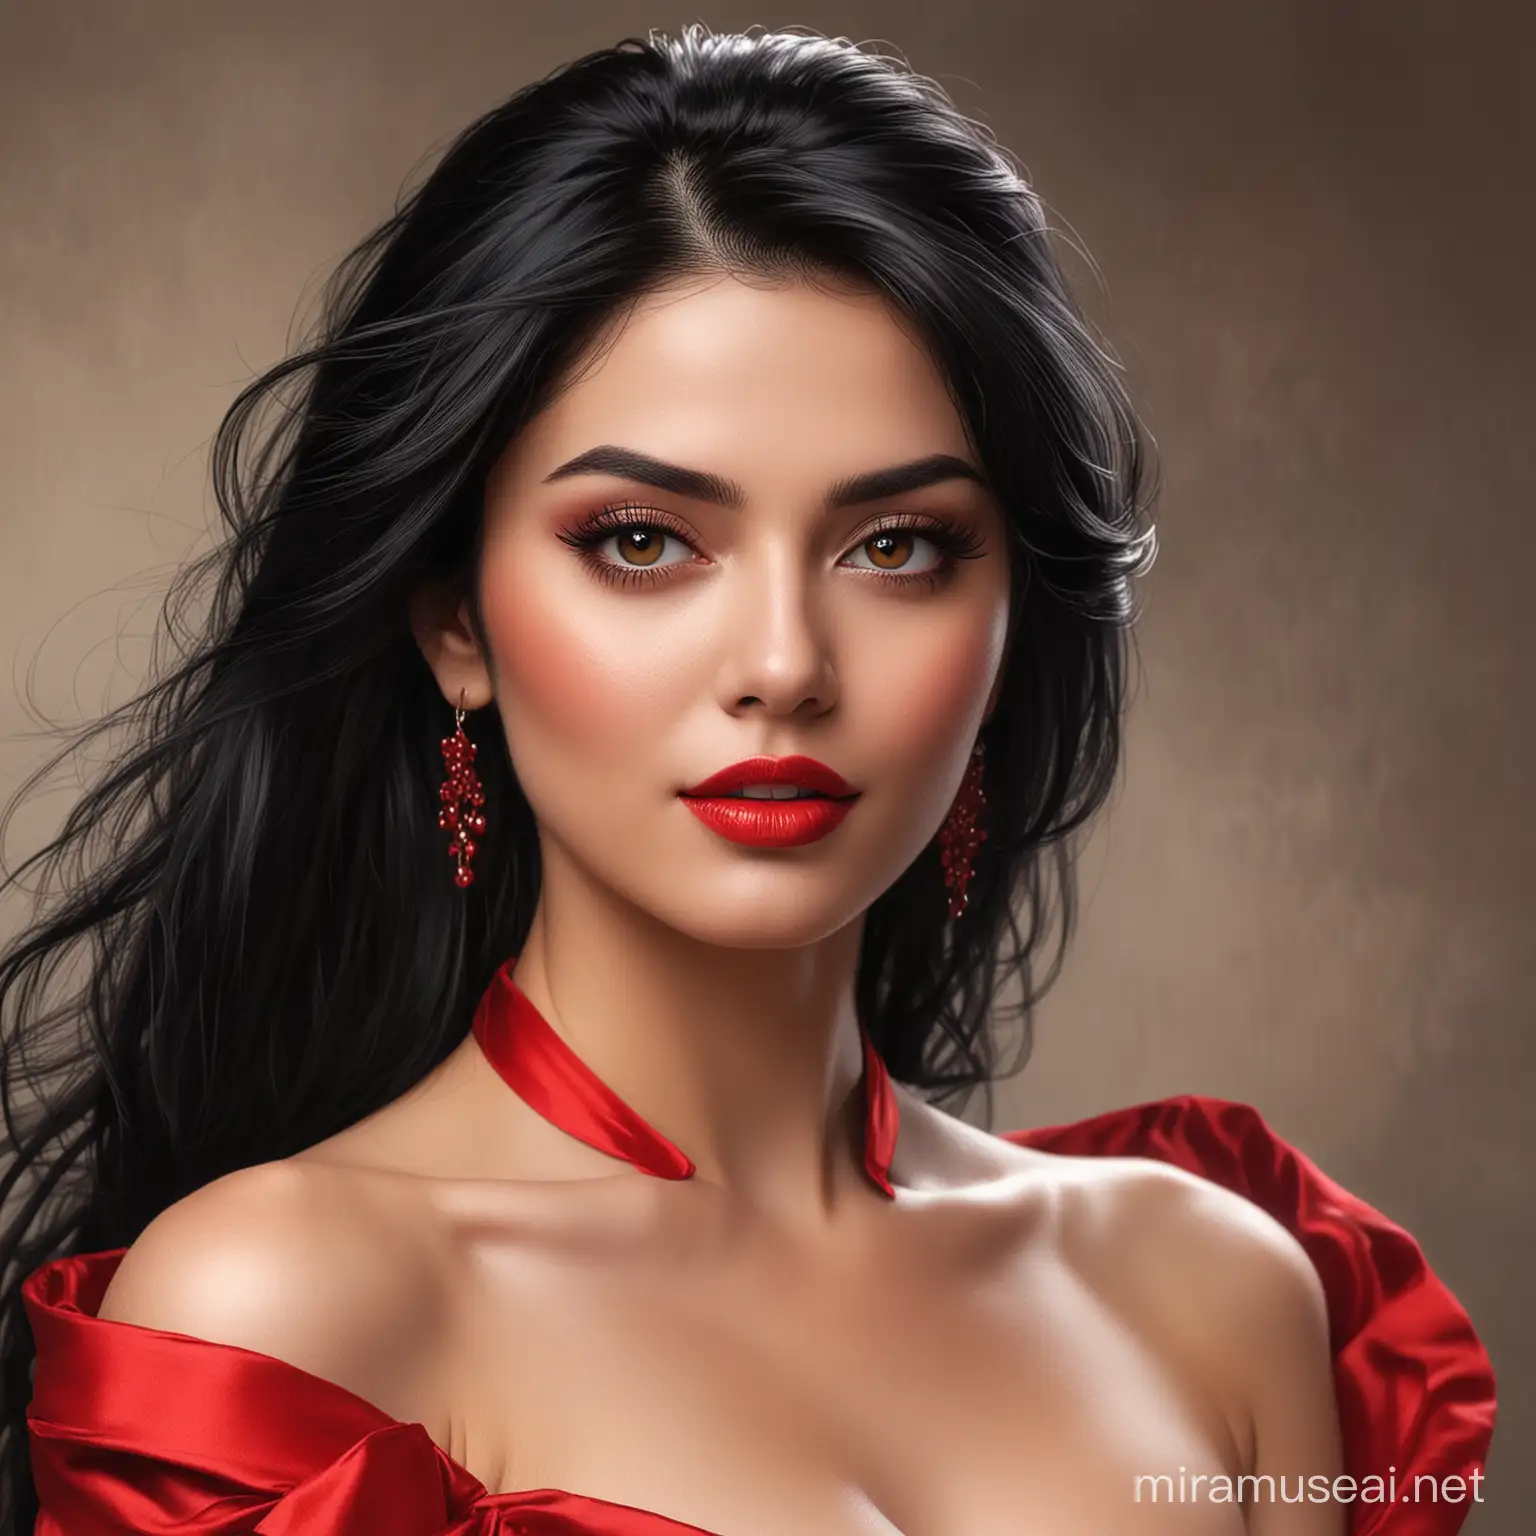 Enigmatic Beauty Captivating Woman in Elegant Red Attire